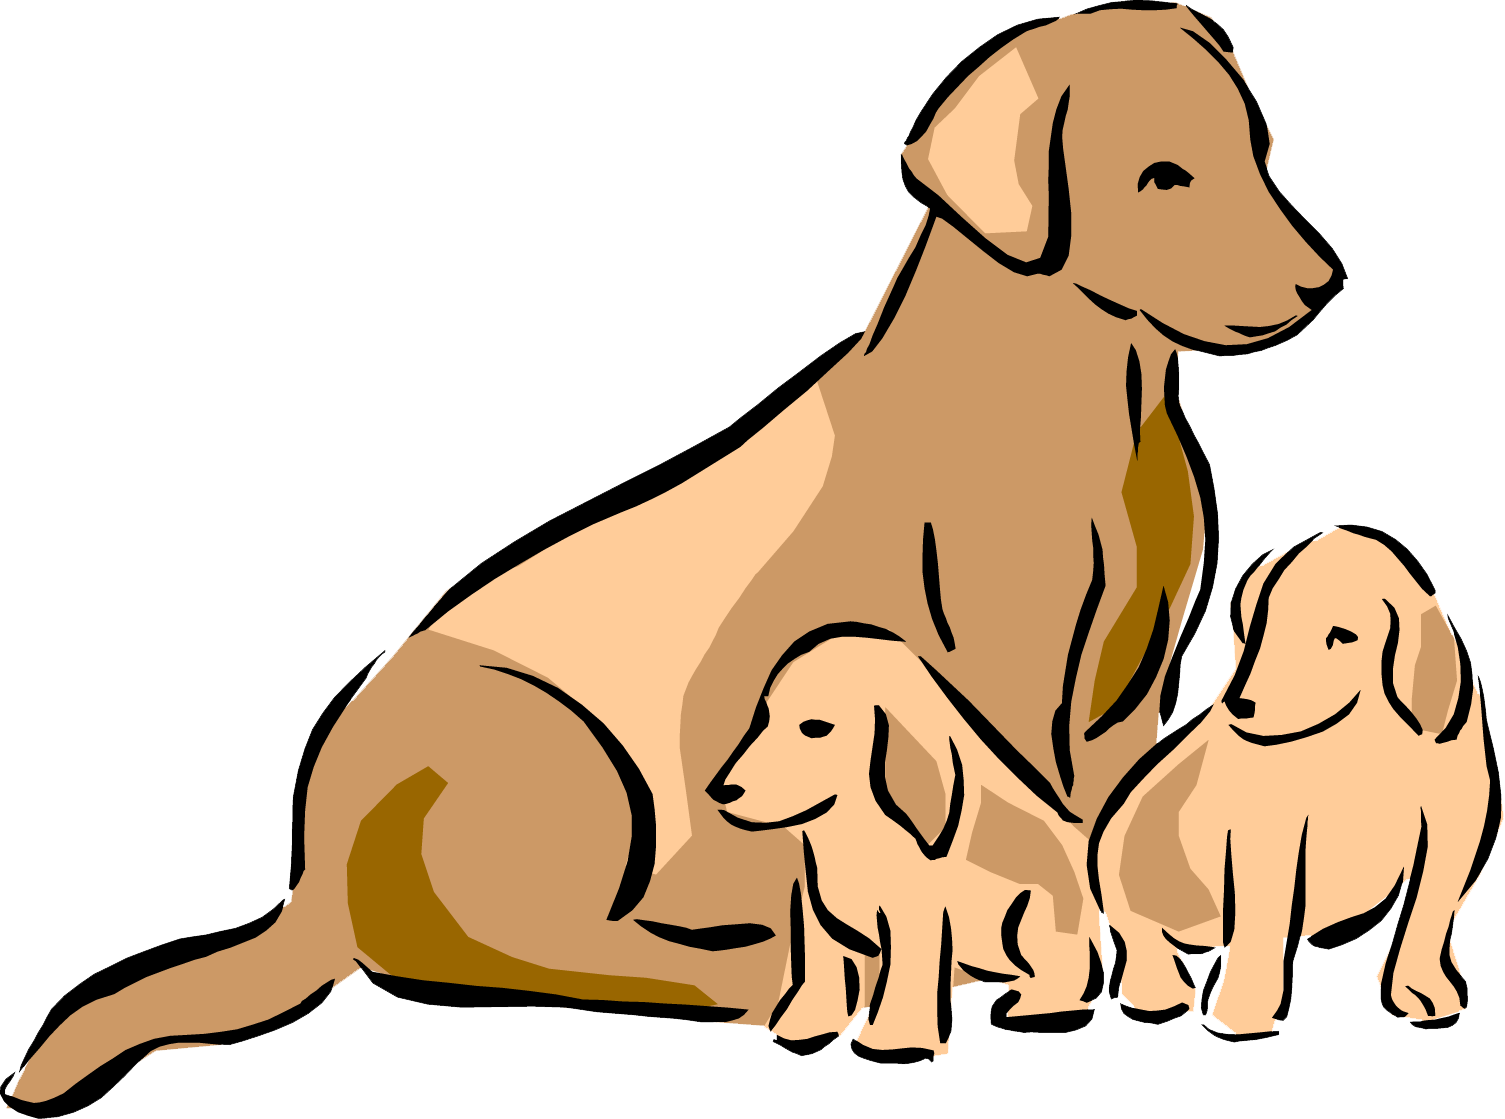 Dogs clipart worried. Dog lovers preparing for